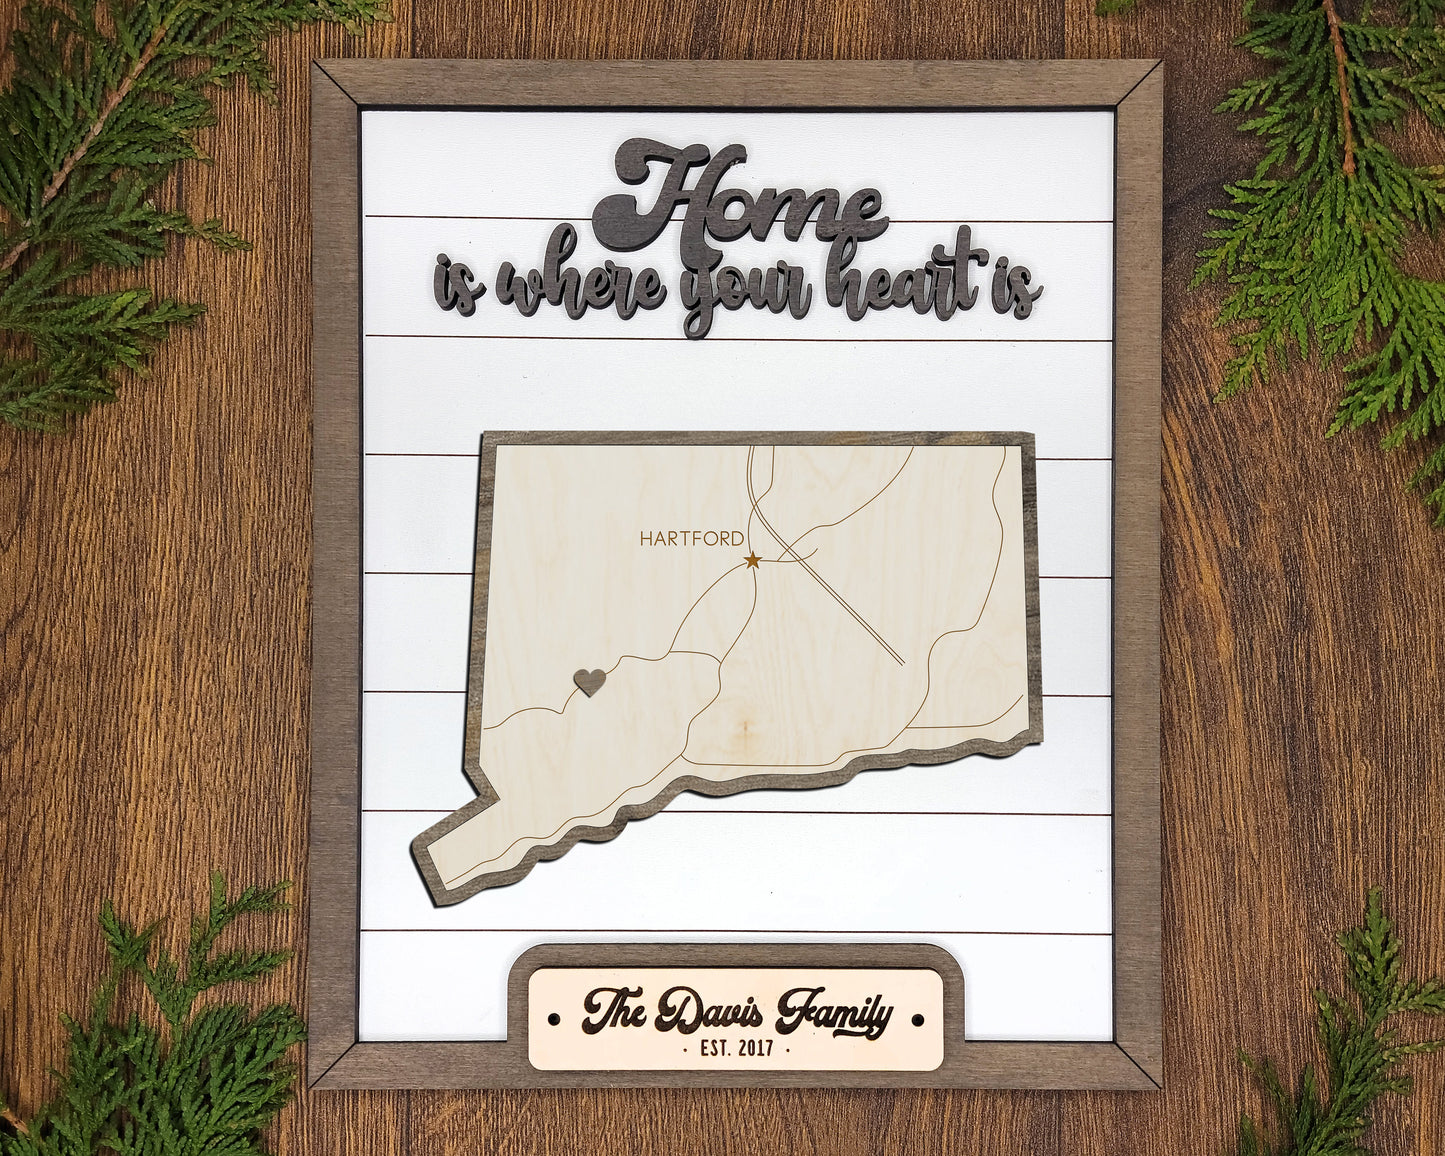 The Connecticut State Frame - 13 text options, 12 backgrounds, 25 icons Included - Make over 7,500 designs - Glowforge & Lightburn Tested